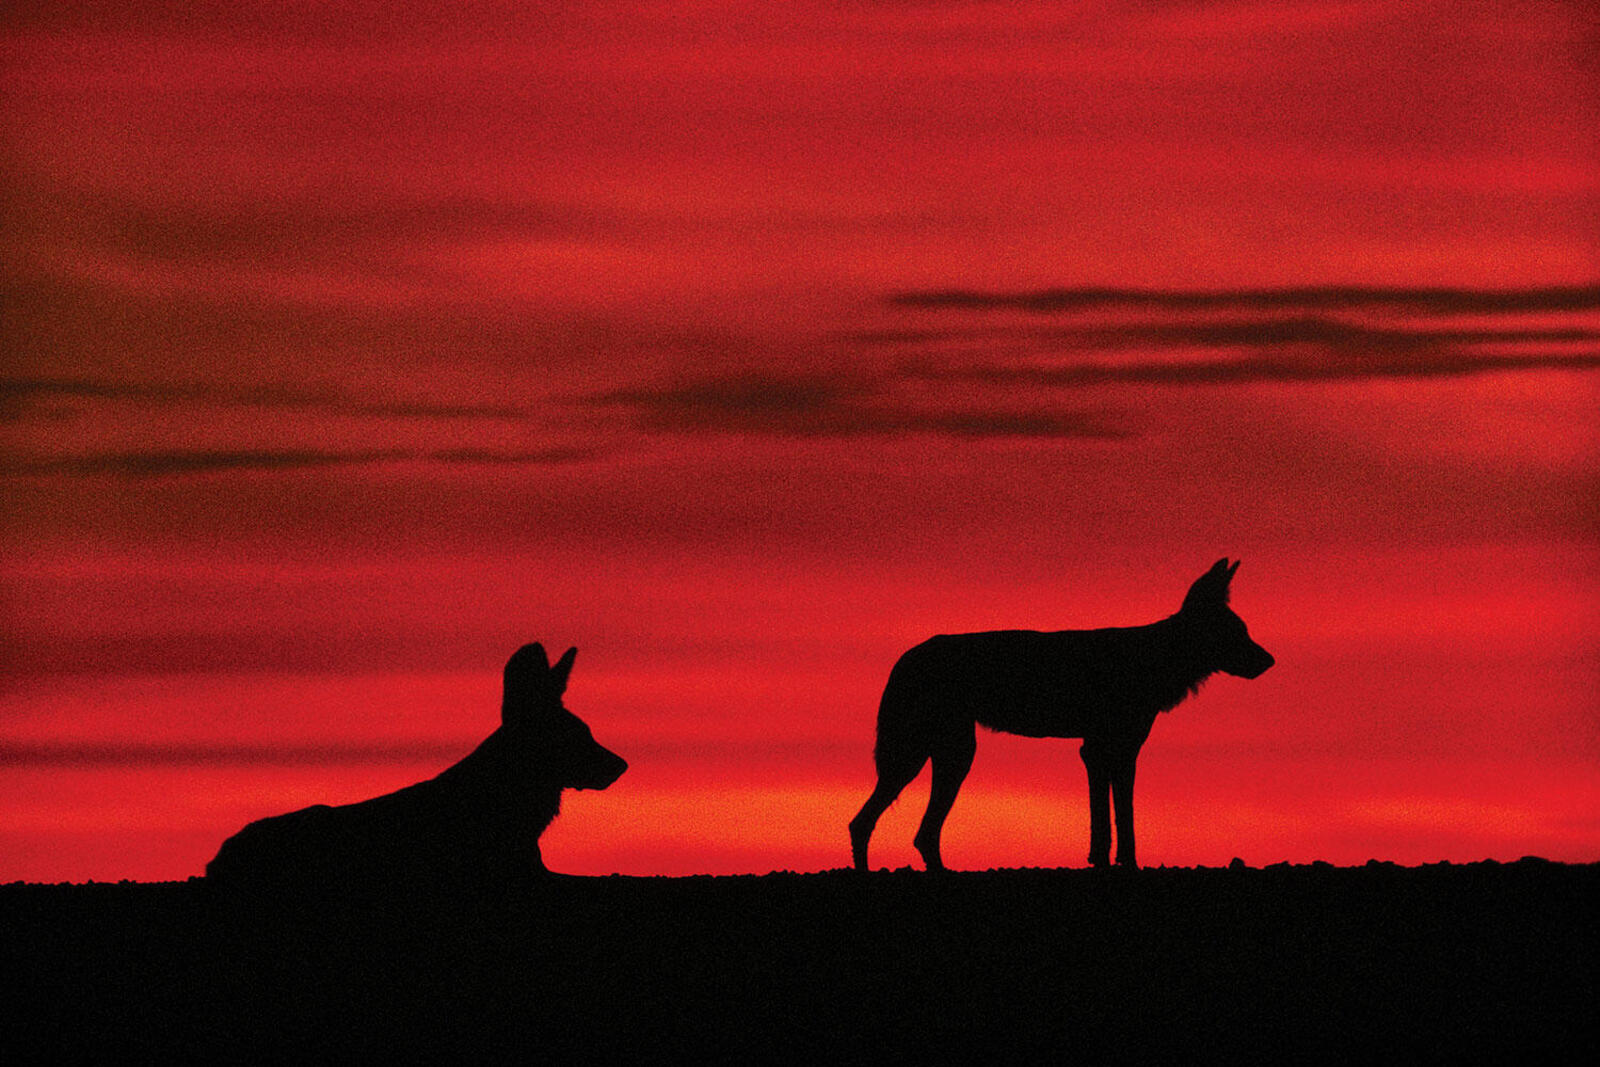 Wild dog silhouettes in the sunset